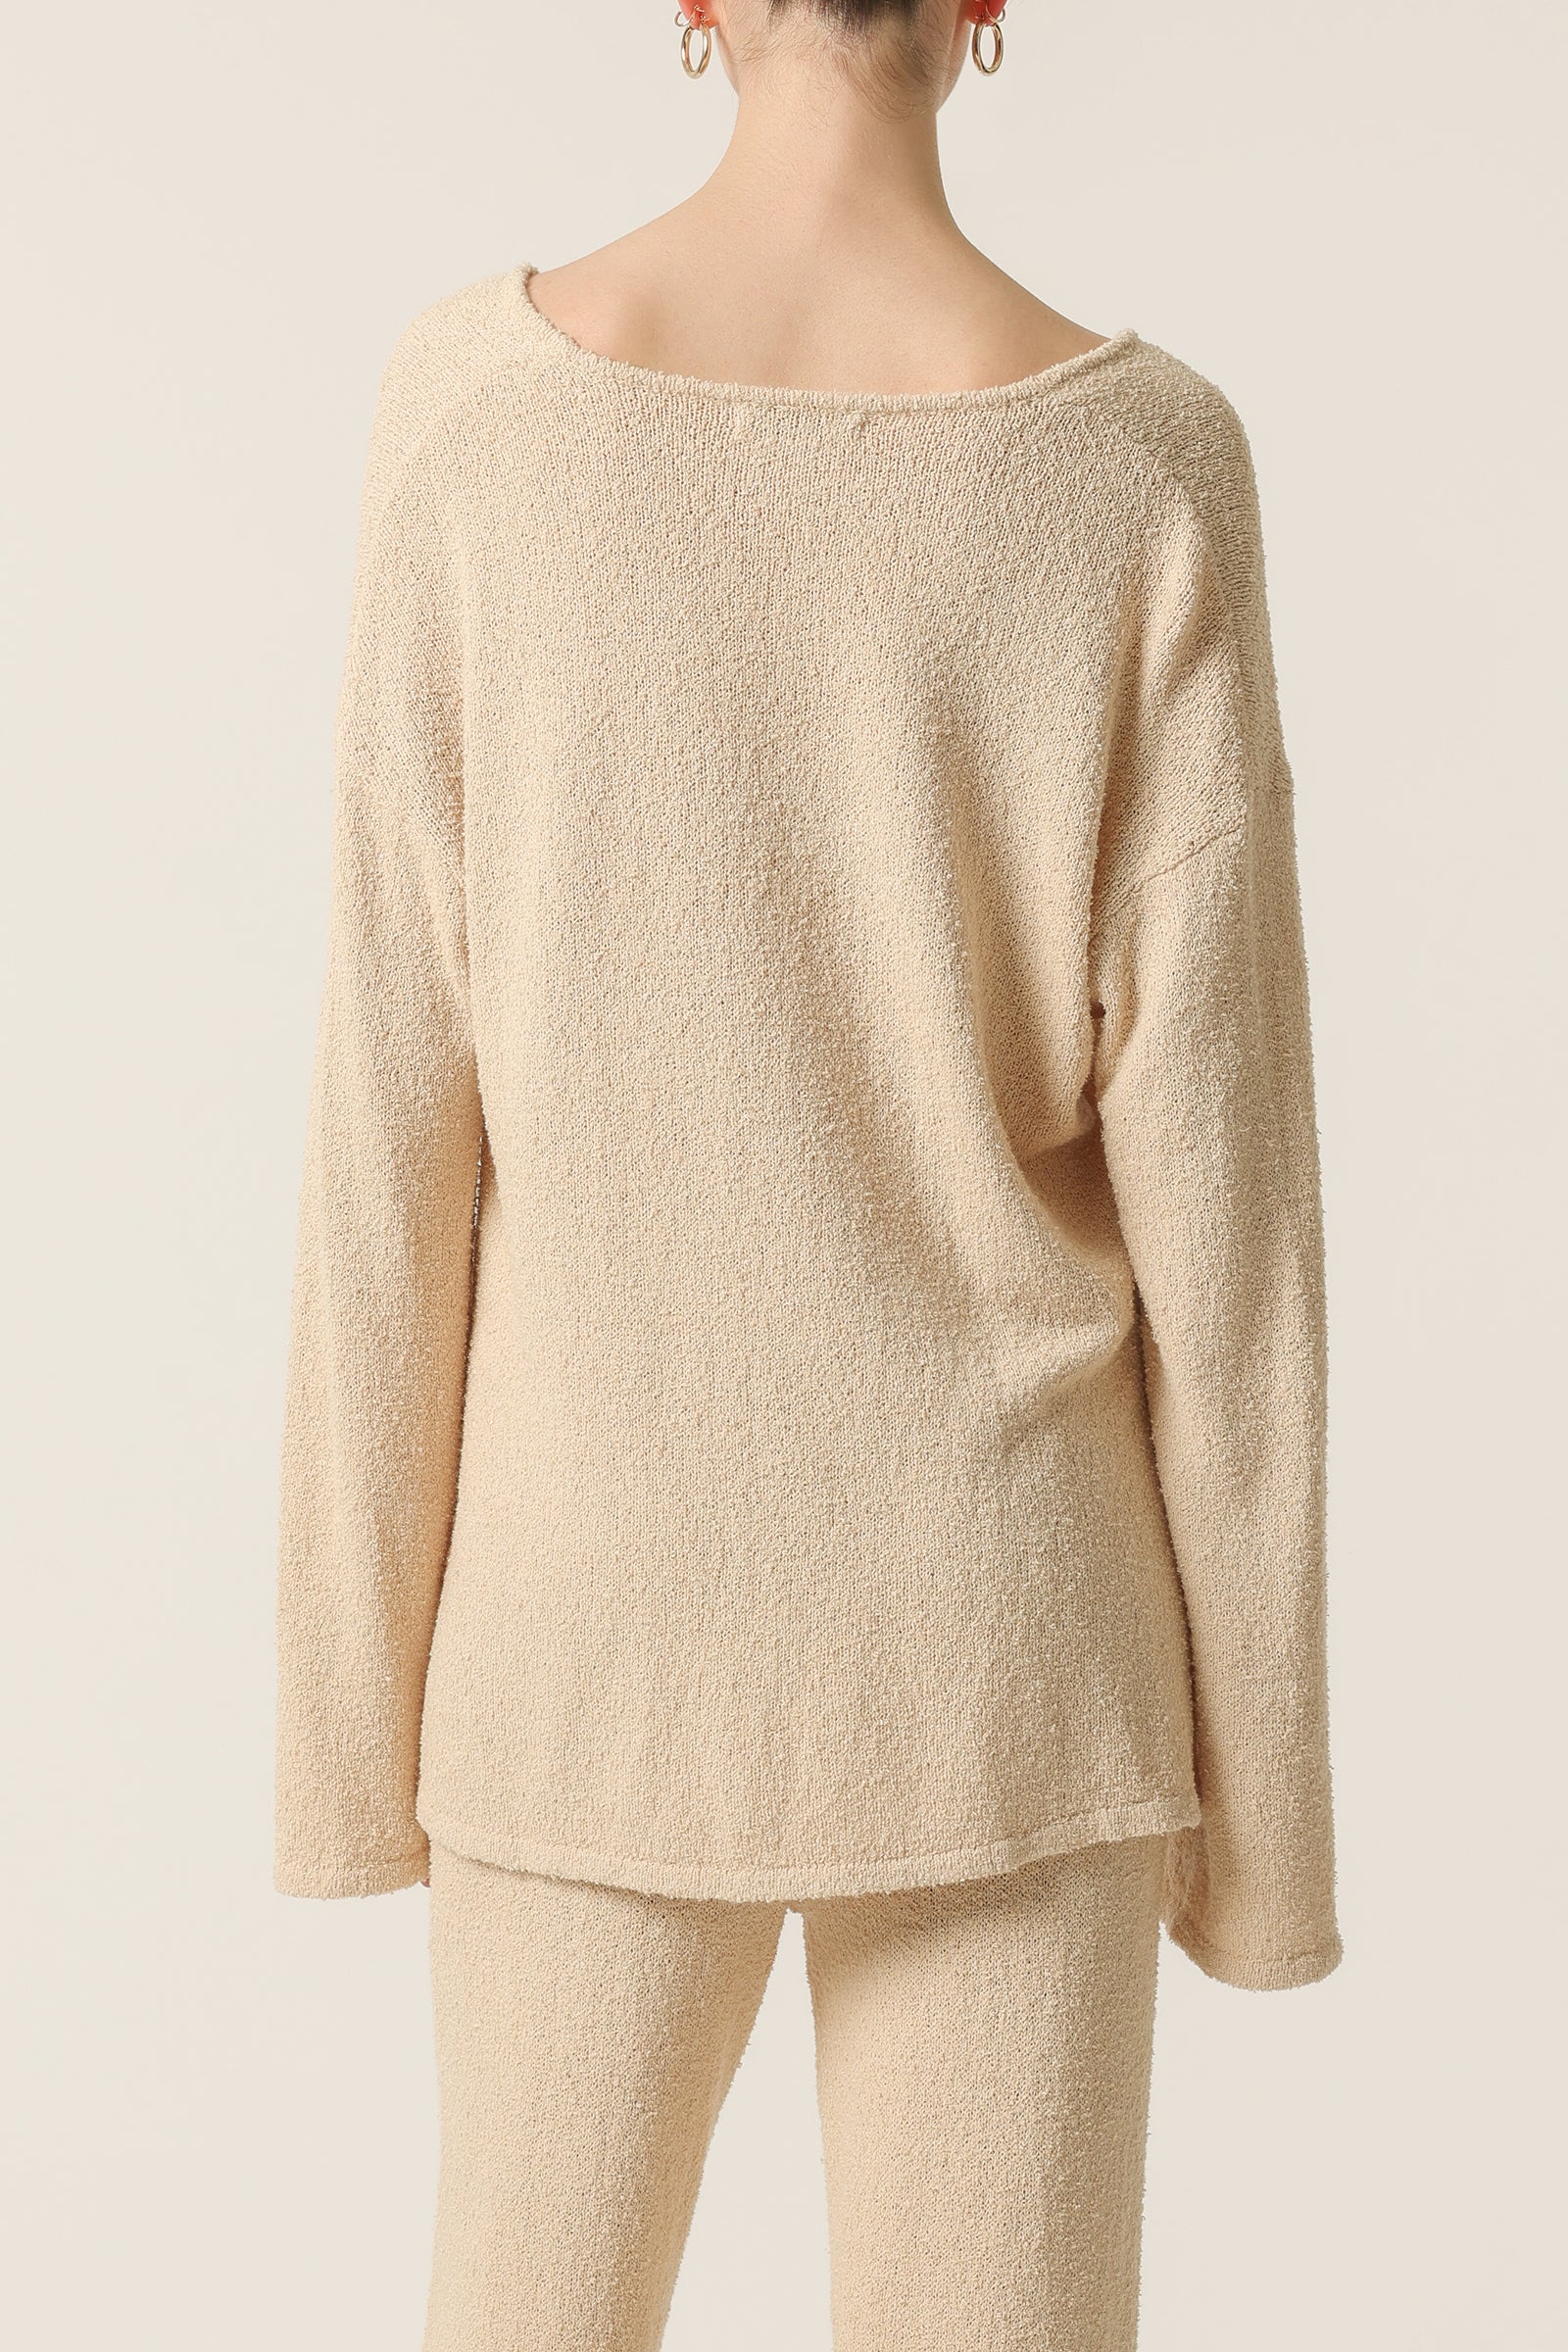 Nude Lucy Blaine Knit Top in White Cloud